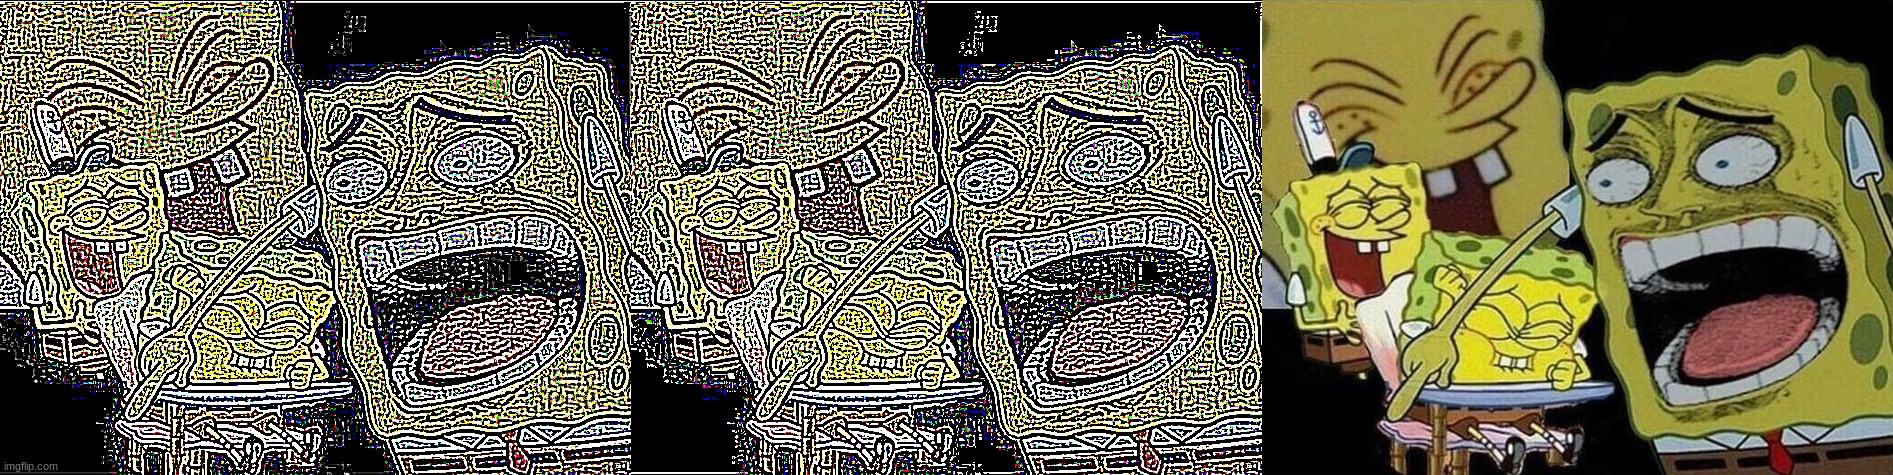 image tagged in deep fried laughing spongebob,deep fried deep fried spongebob laughing,spongebob laughing hysterically | made w/ Imgflip meme maker